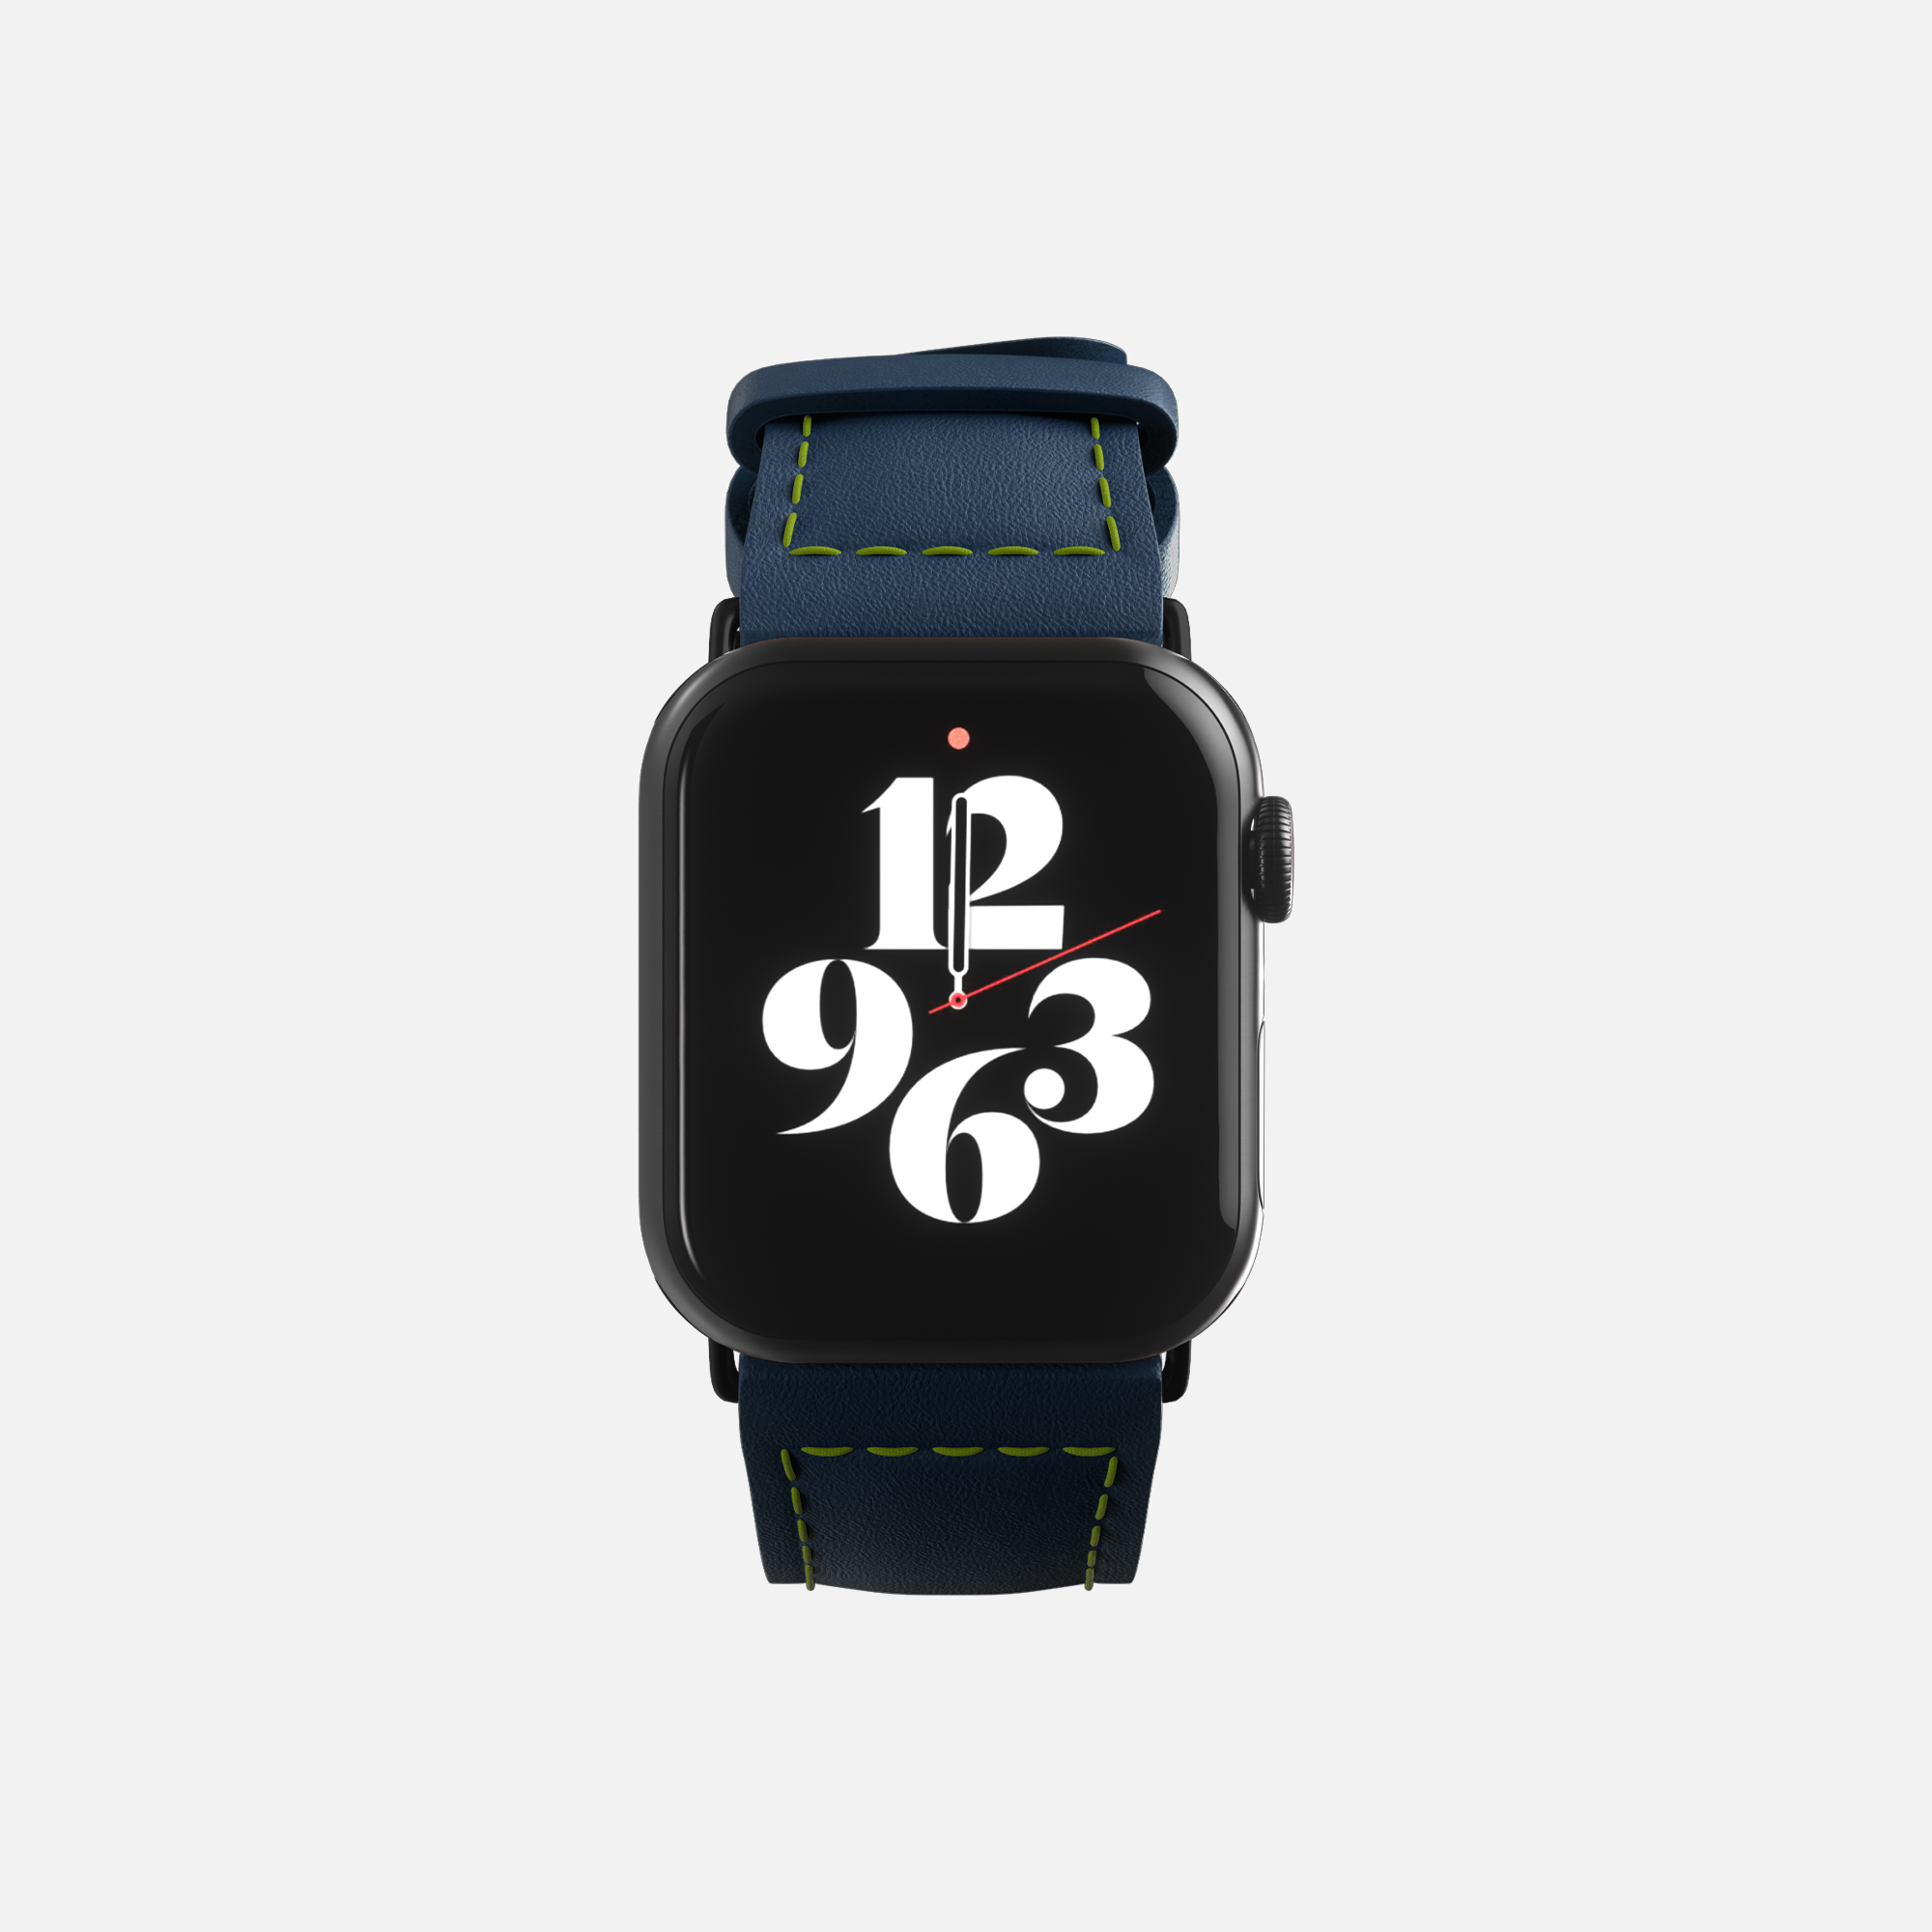 Modern Apple  smartwatch with navy blue strap and stylized clock face design showing time.